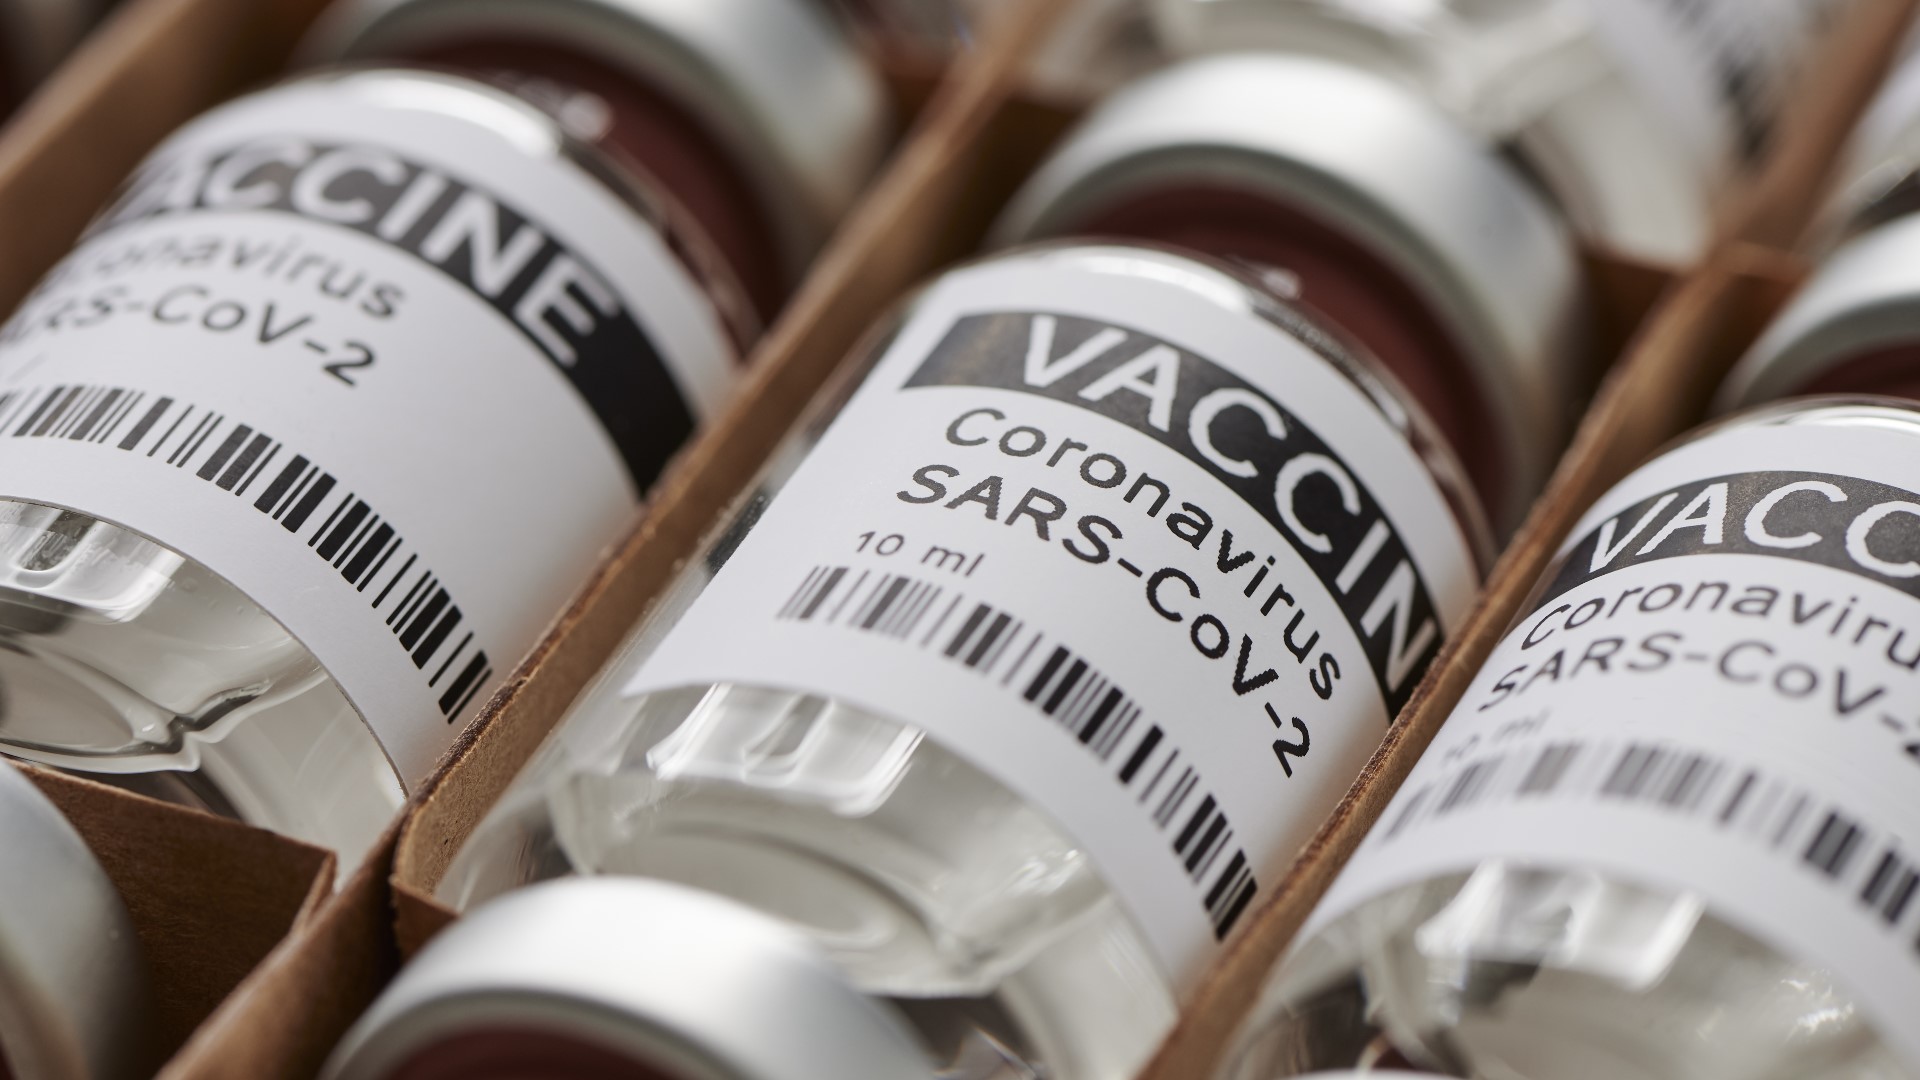 Several claims on social media discount the validity of the COVID-19 vaccine, saying it's not a real vaccine.